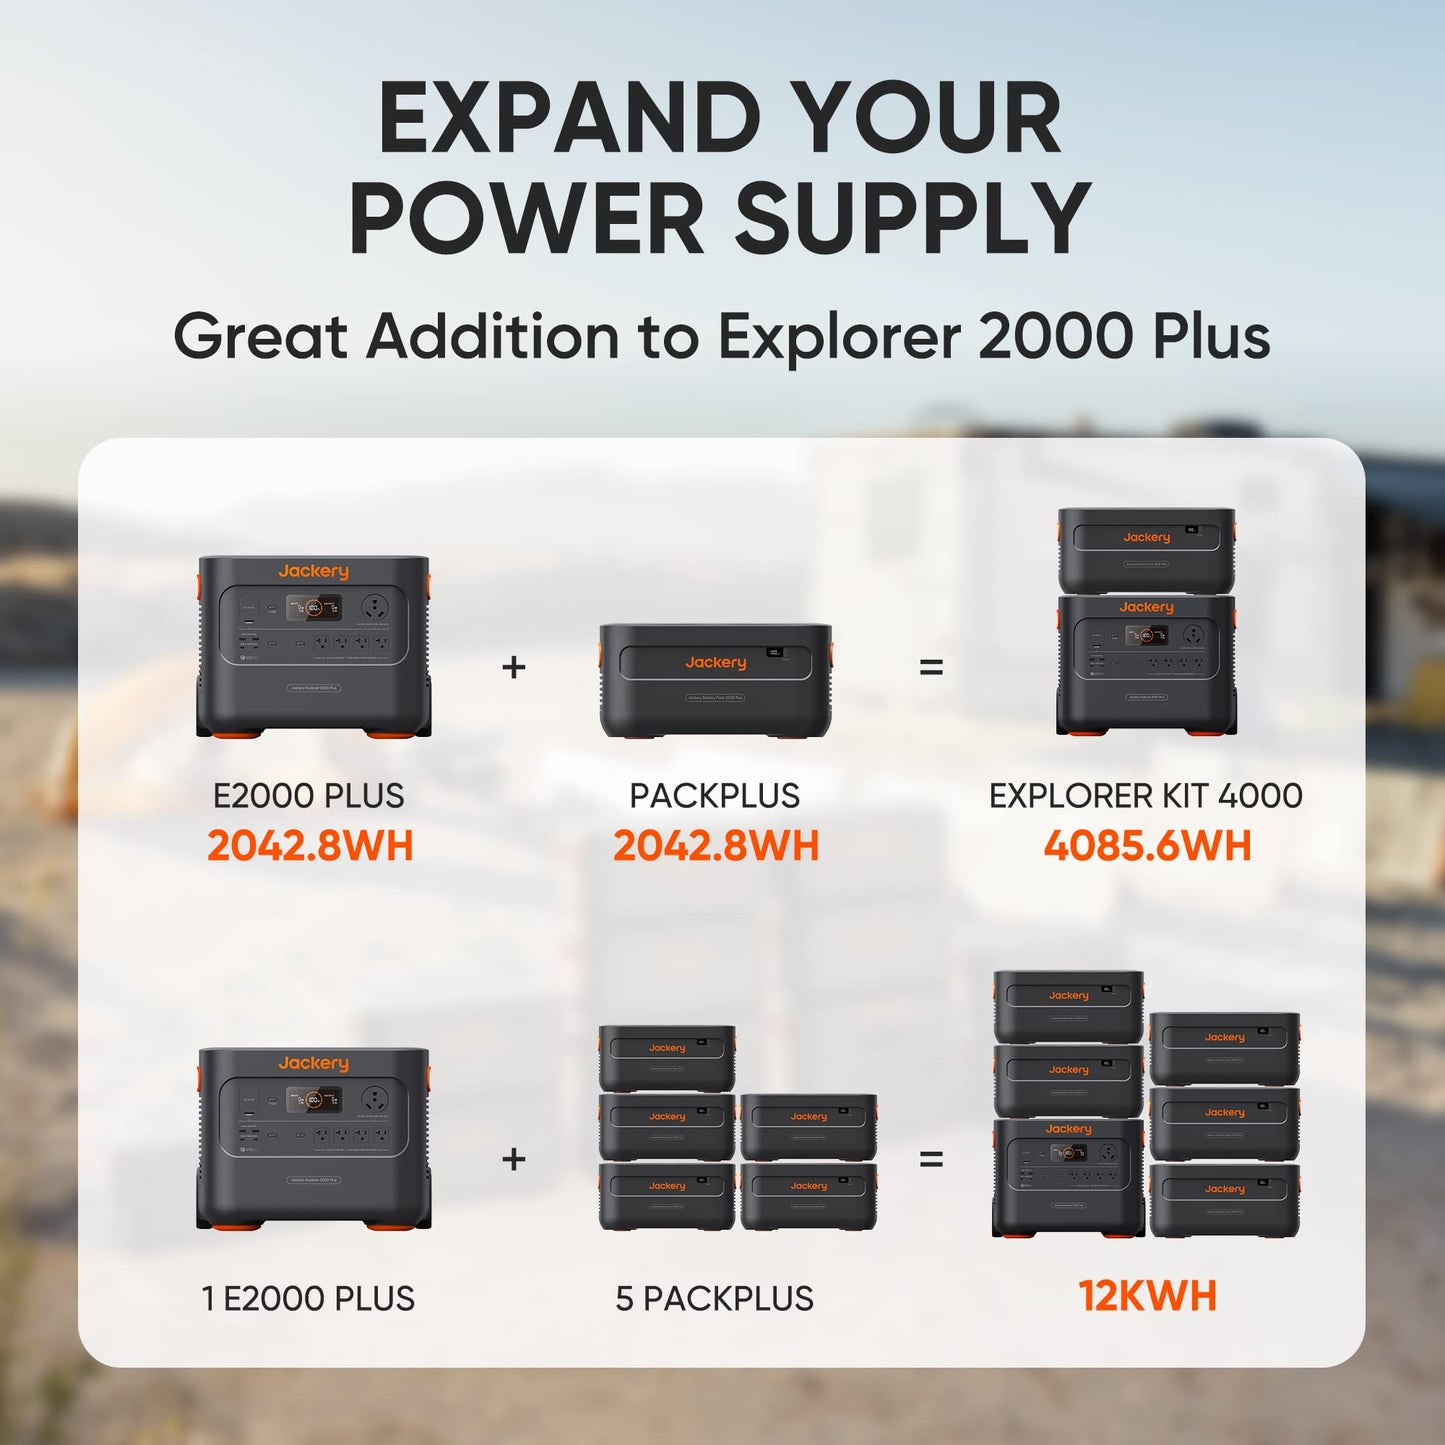 Jackery Expansion Battery Pack 2000 Plus, 2042Wh LiFePO4 Battery Pack for Portable Power Station Explorer 2000 Plus, Extra Expandable Battery for Outdoor RV Camping and Home Emergency Explorer 2000 Plus Battery Pack